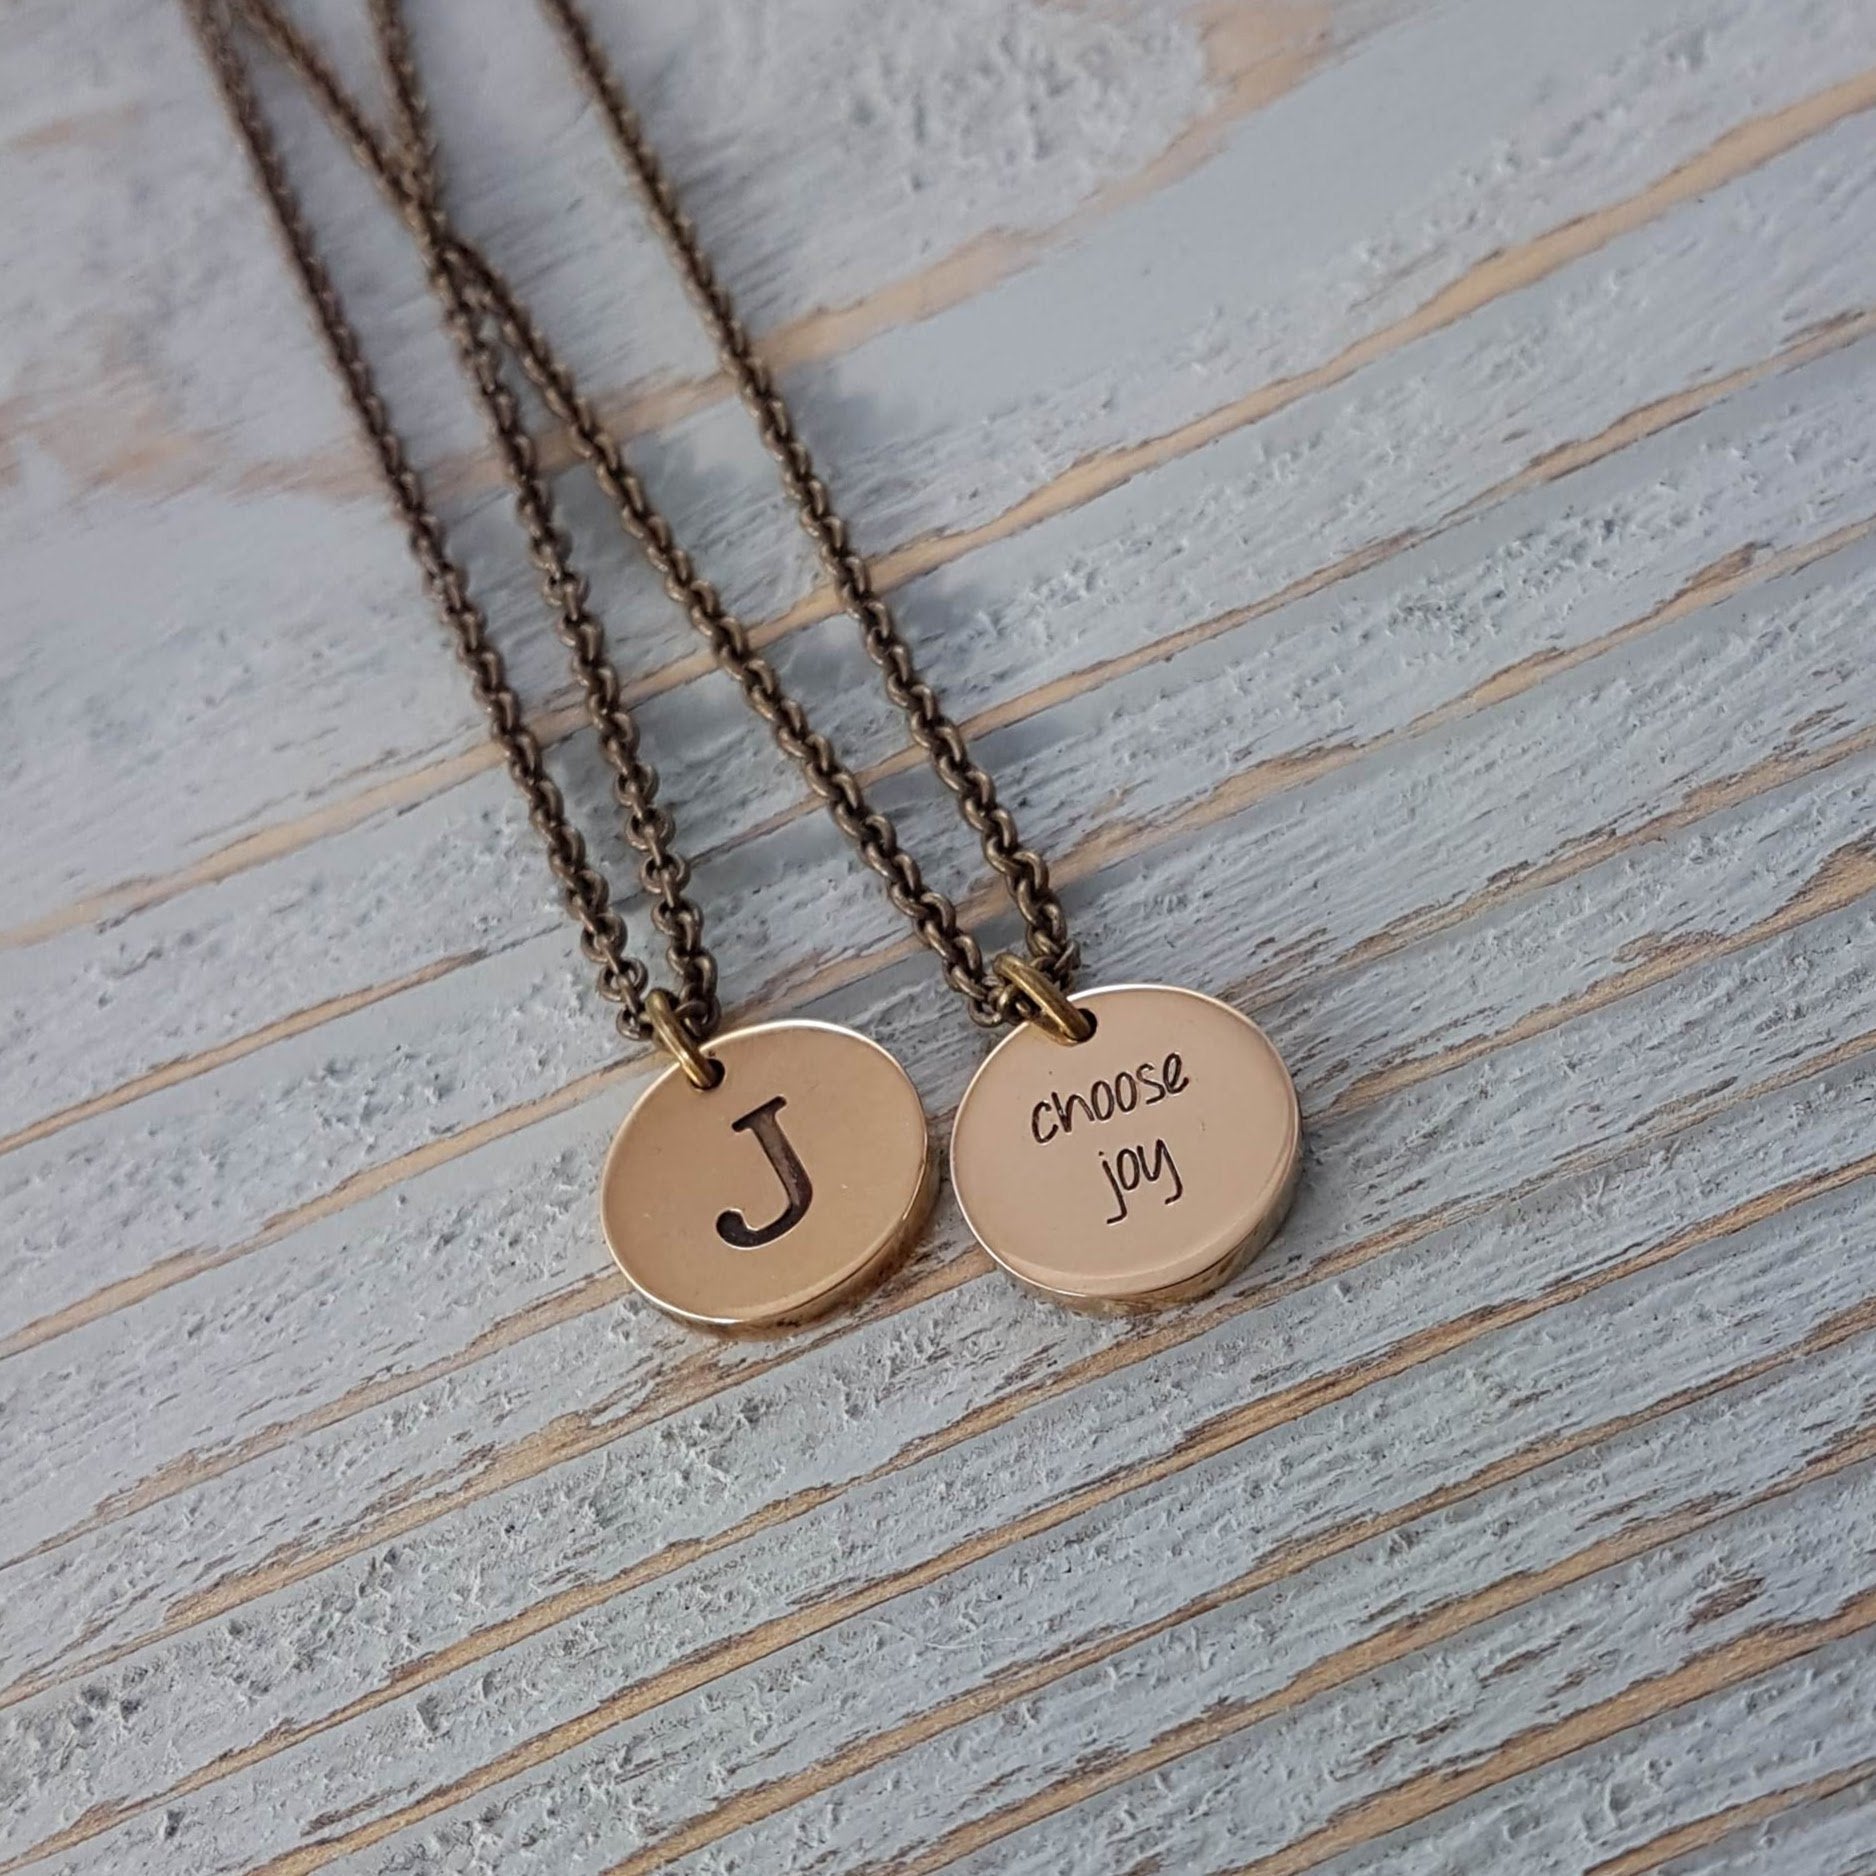 Custom Engraved Gold Pendant Necklace, Initials, Symbols, Names, Dates, Logo, Image, Fingerprint, Handwritting in any language - Gwen Delicious Jewelry Designs